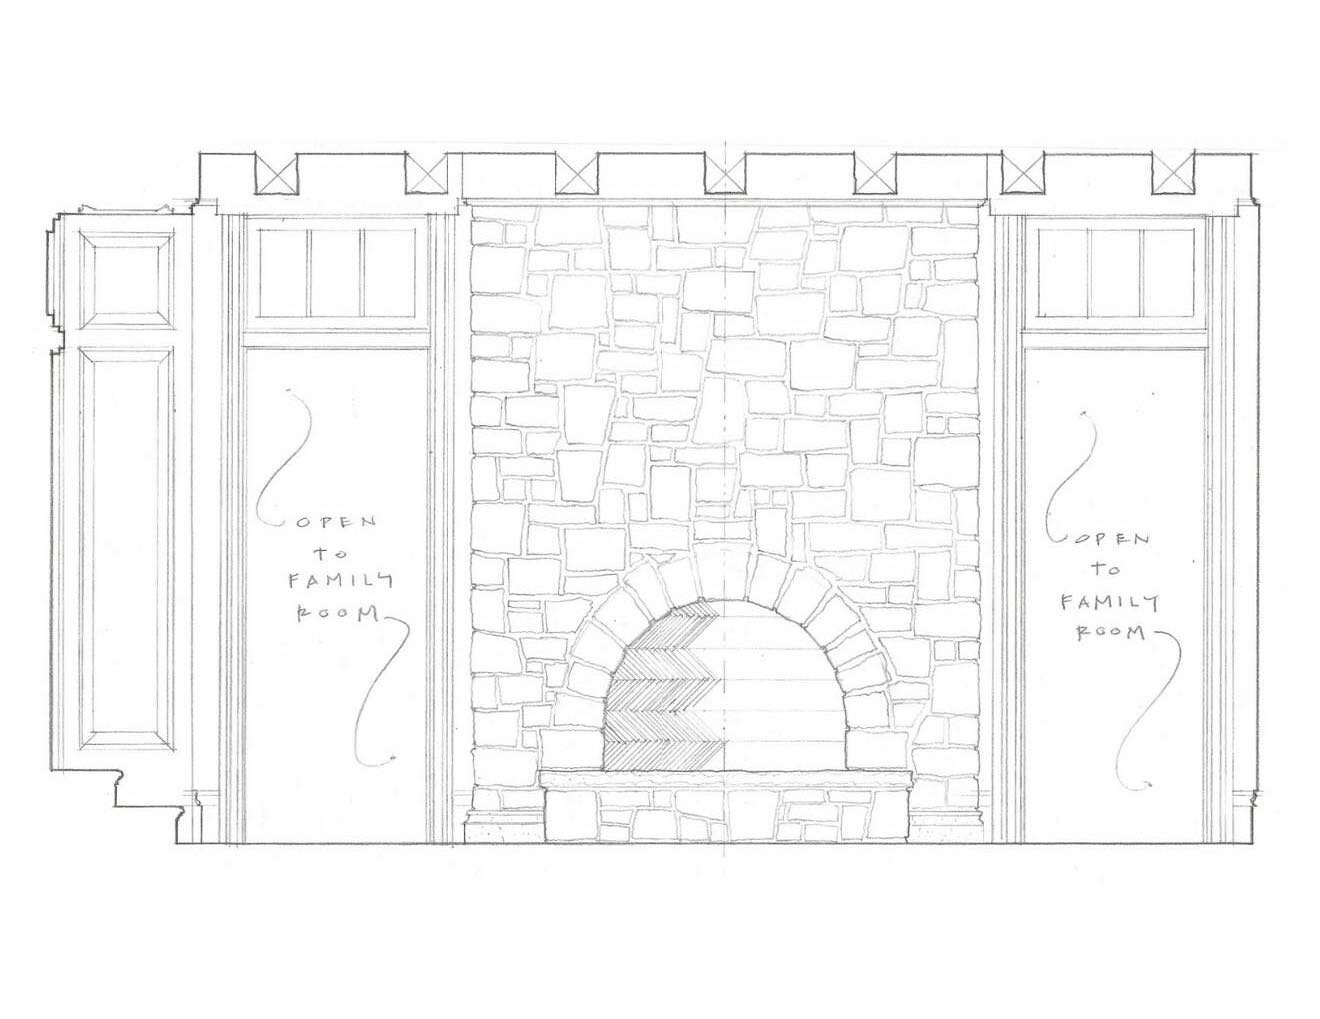 A study fireplace elevation for a new home currently on the boards. 
.
.
.
#architecture #traditionaldesign #handdrawn #design #fireplace #stone #transom #home #mountainbrook #carlislemoorearchitects